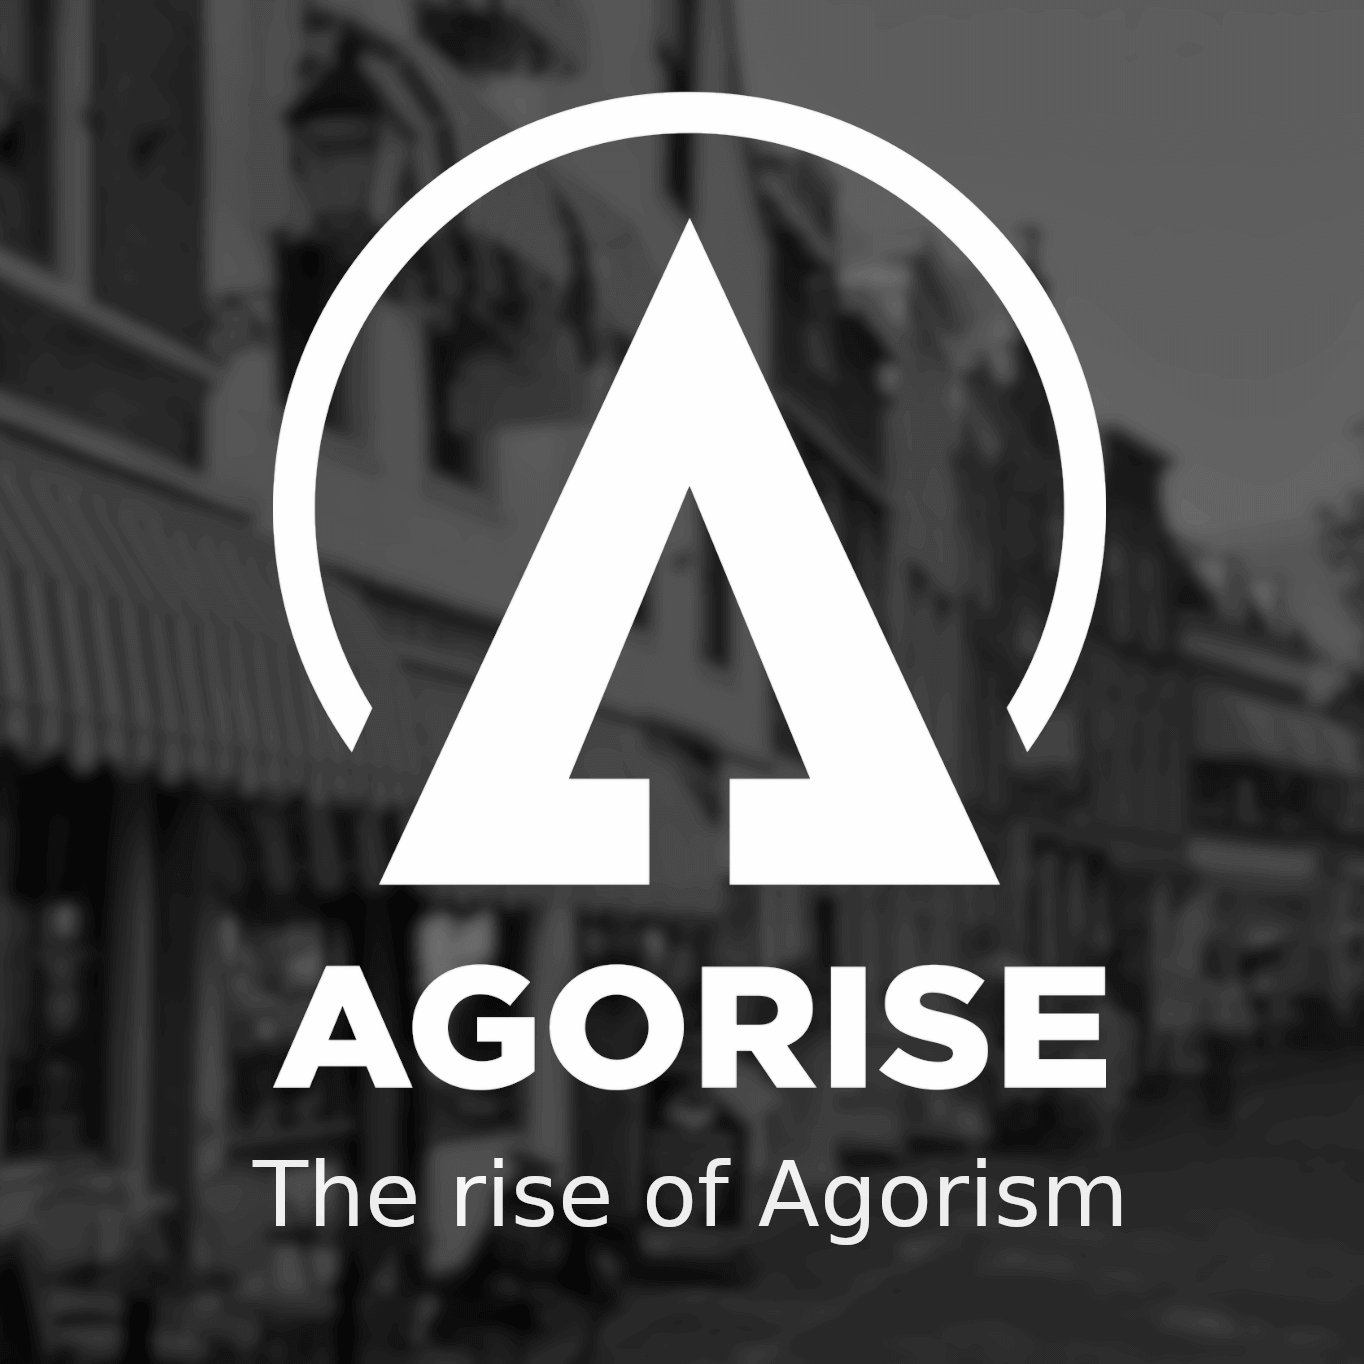 Agorise - Bringing Agorism to the world. Agorist tools and products.